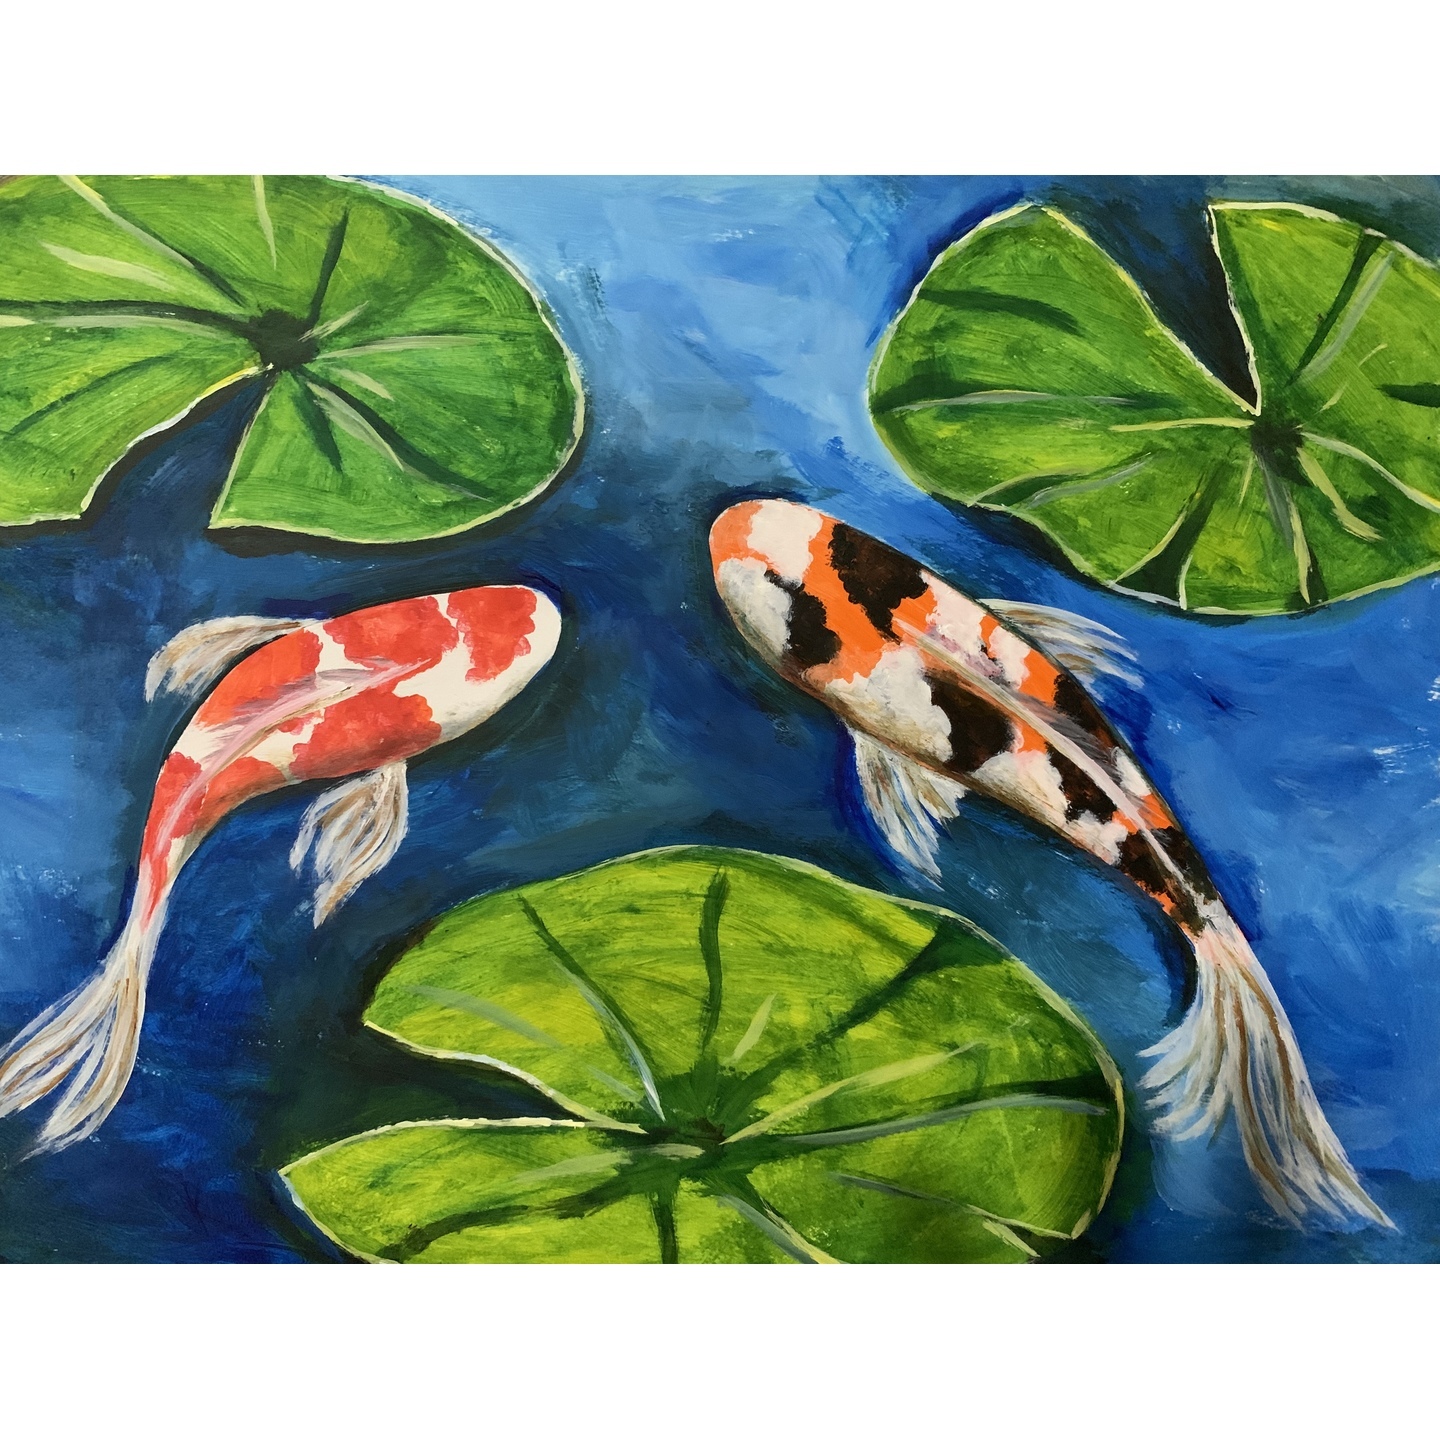 Koi fish with Lily pads